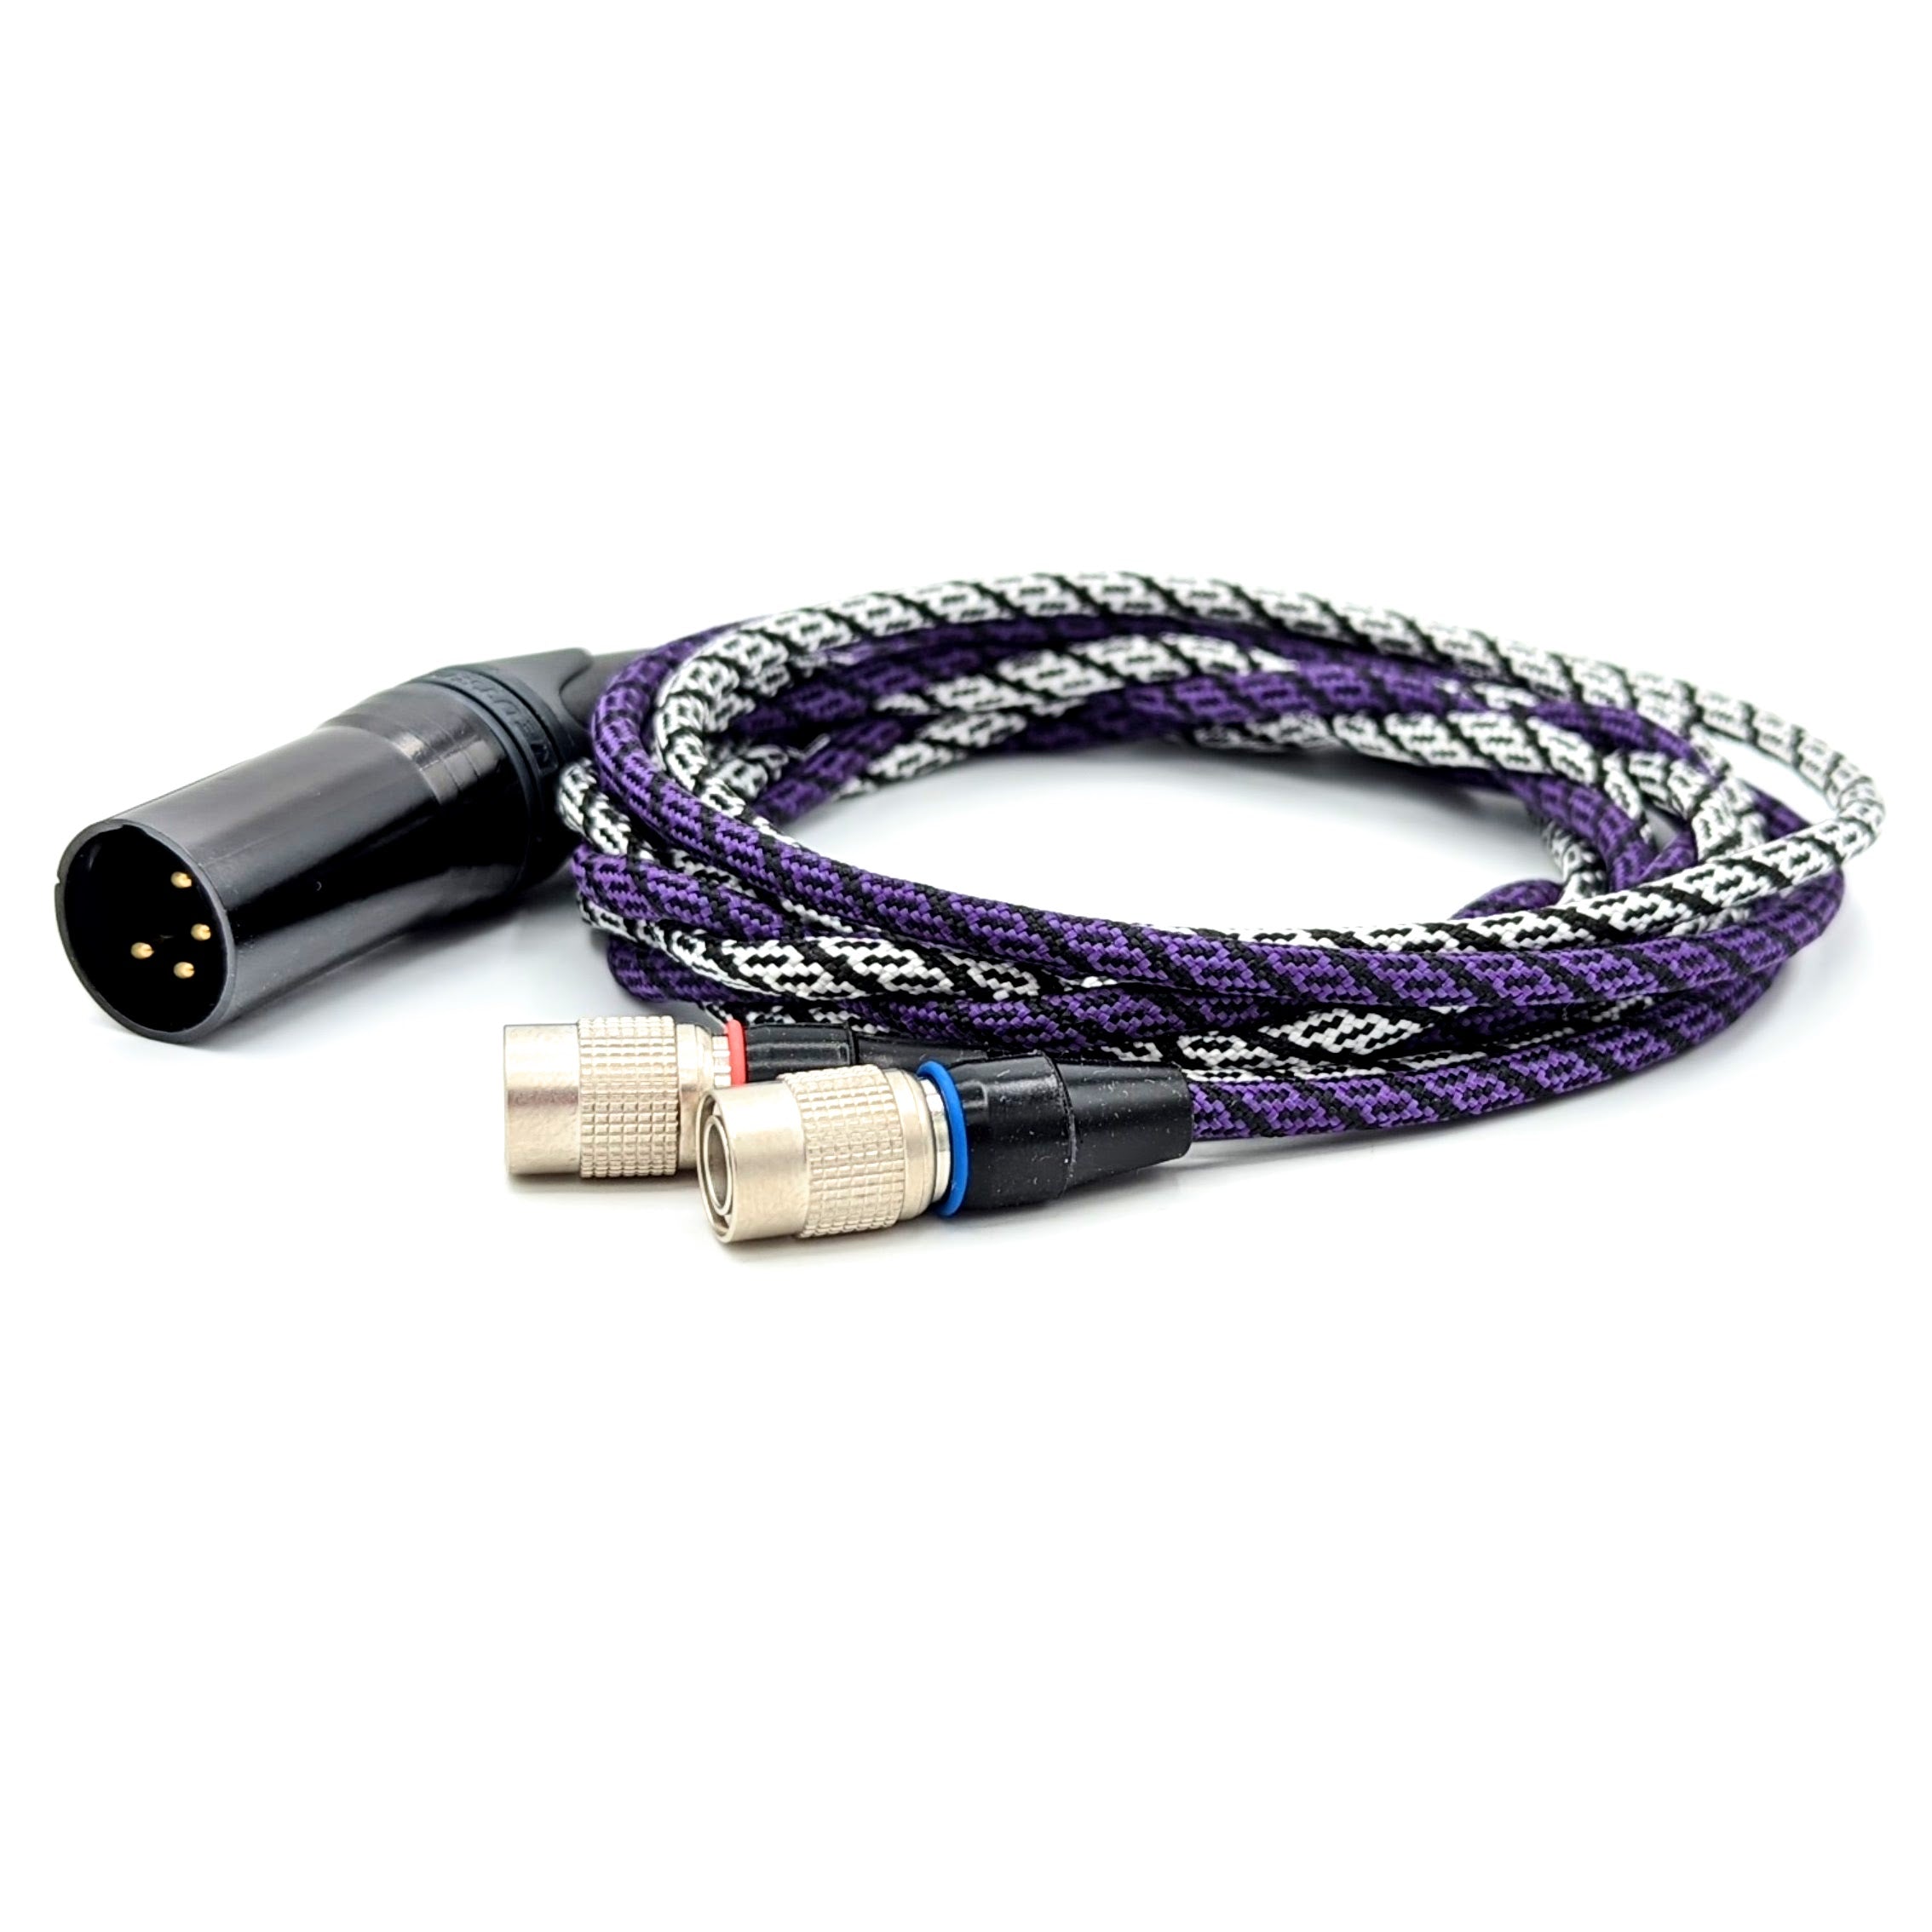 Custom Twisted Braid Dual Push-Pull Headphone Cable for DCA / Mr. Speakers